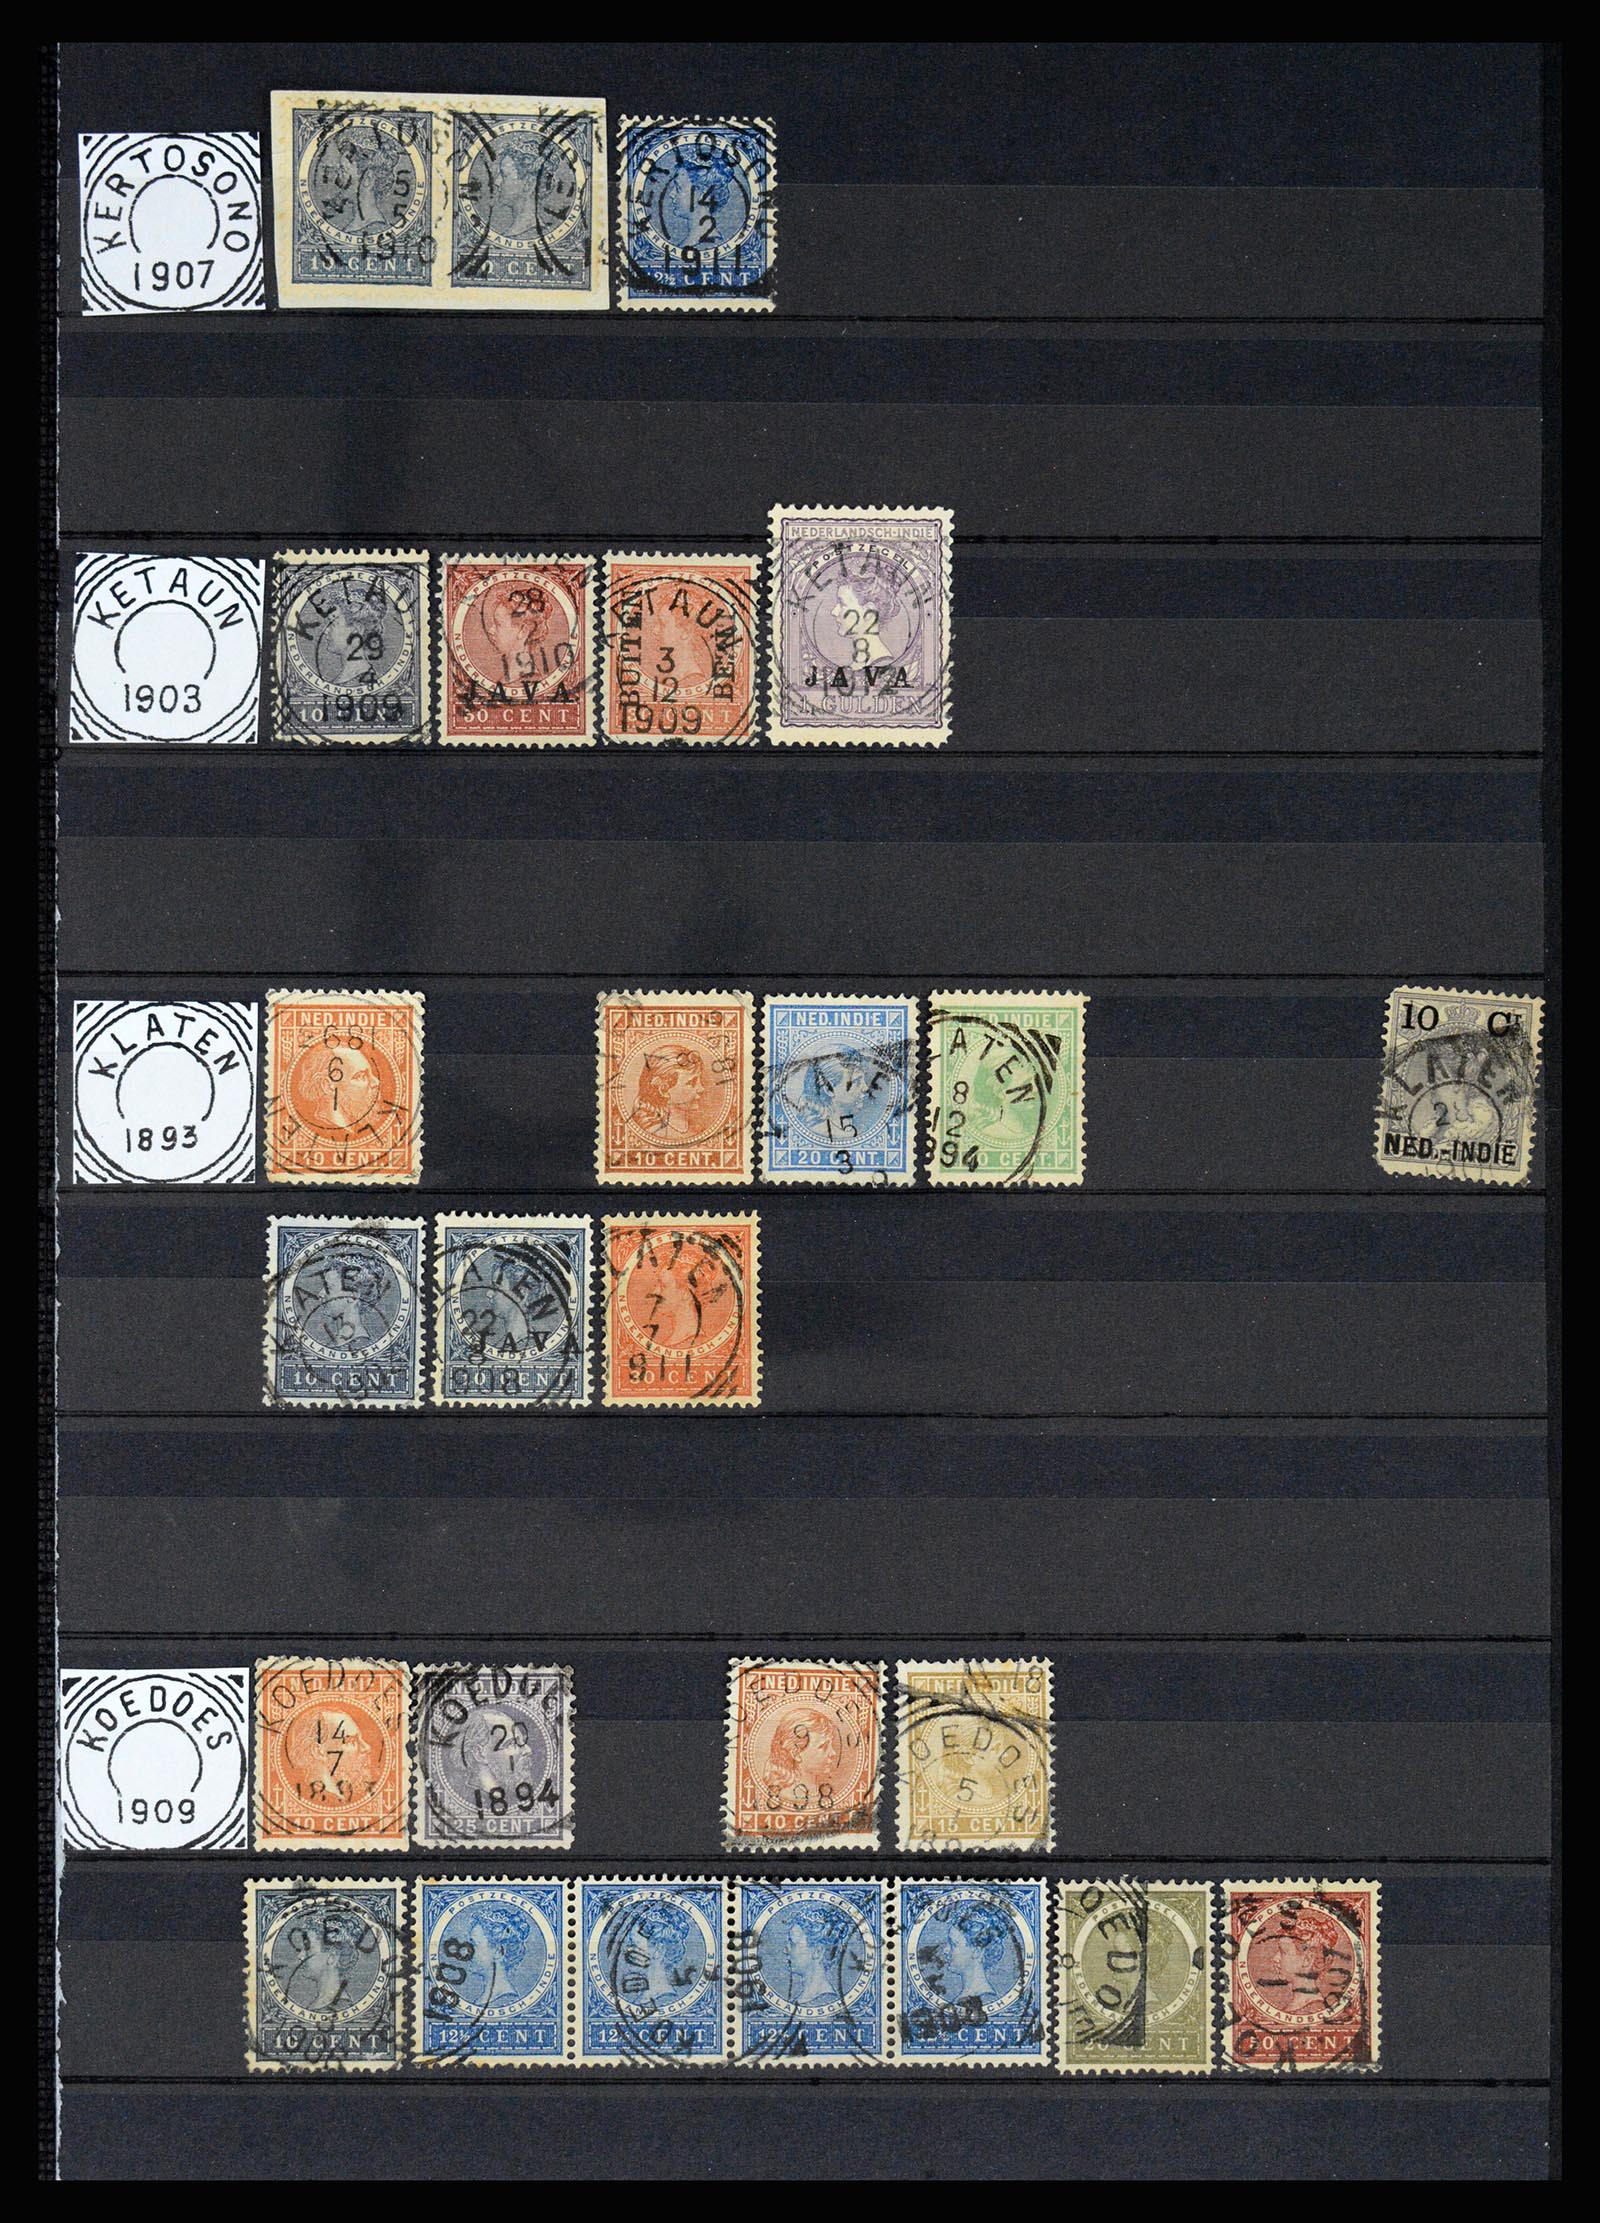 36839 020 - Stamp collection 36839 Dutch east Indies square cancels.